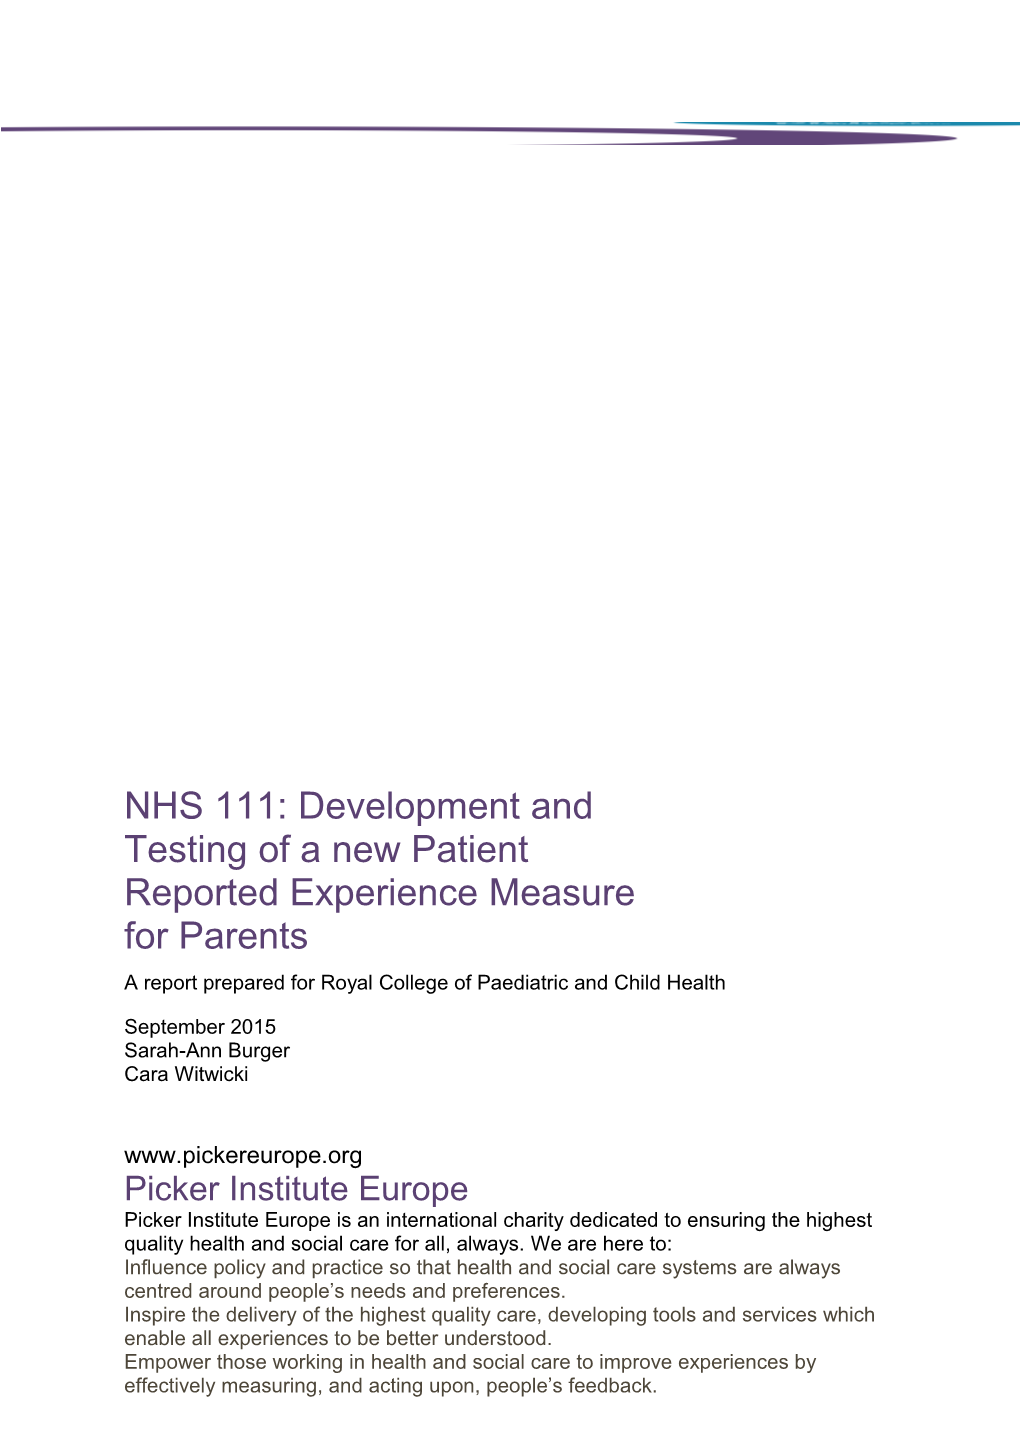 NHS 111: Development and Testing of a New Patient Reported Experience Measure for Parents